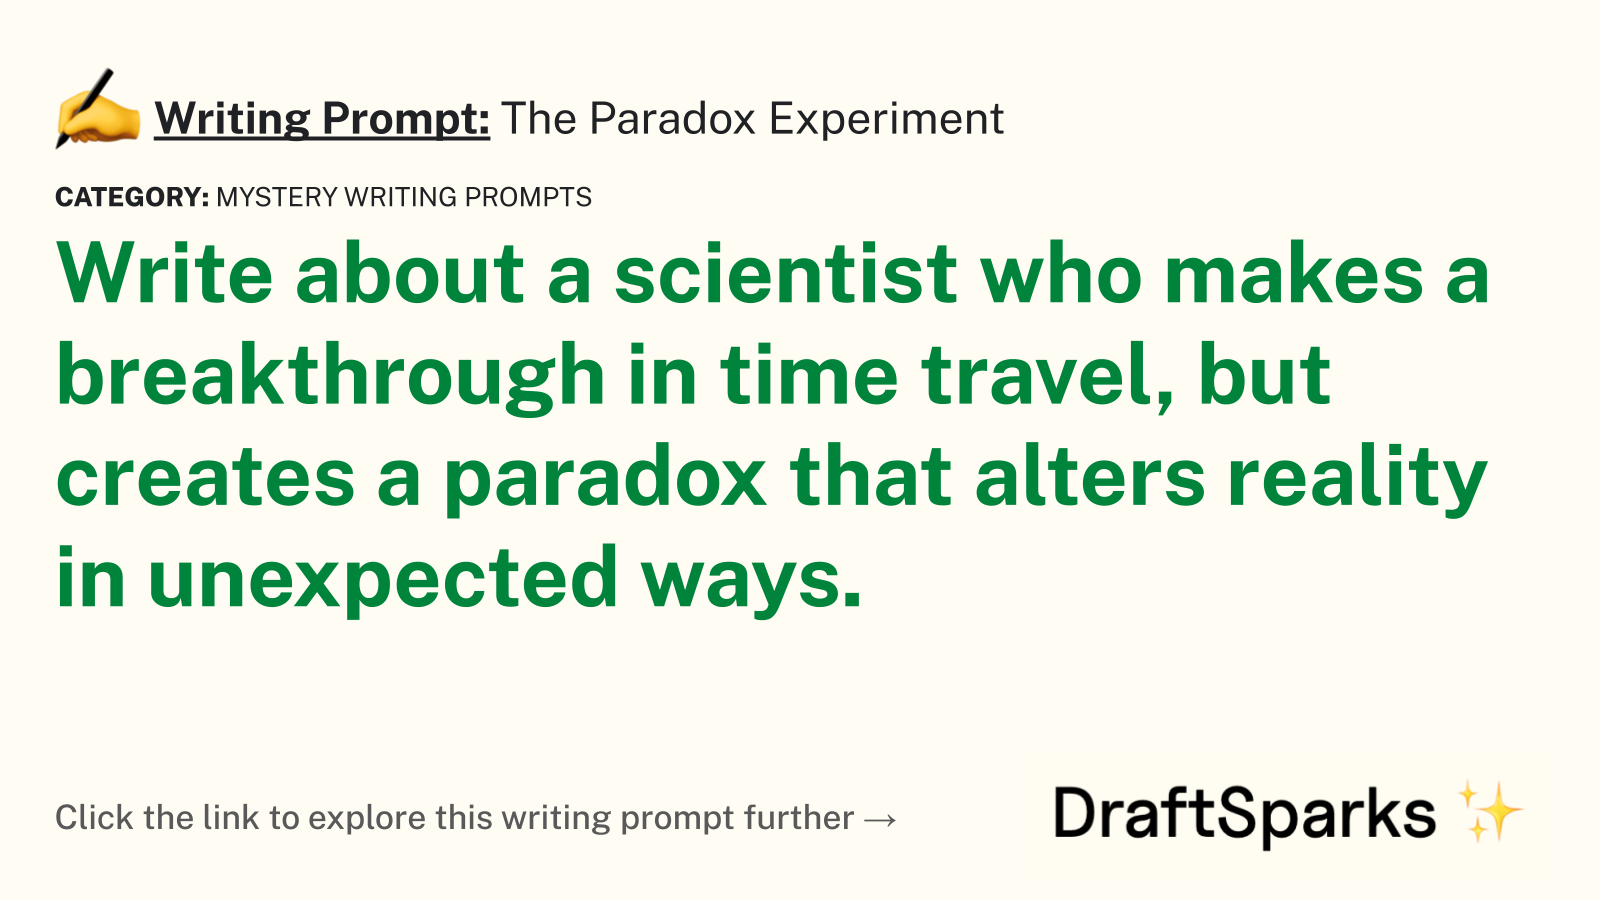 The Paradox Experiment